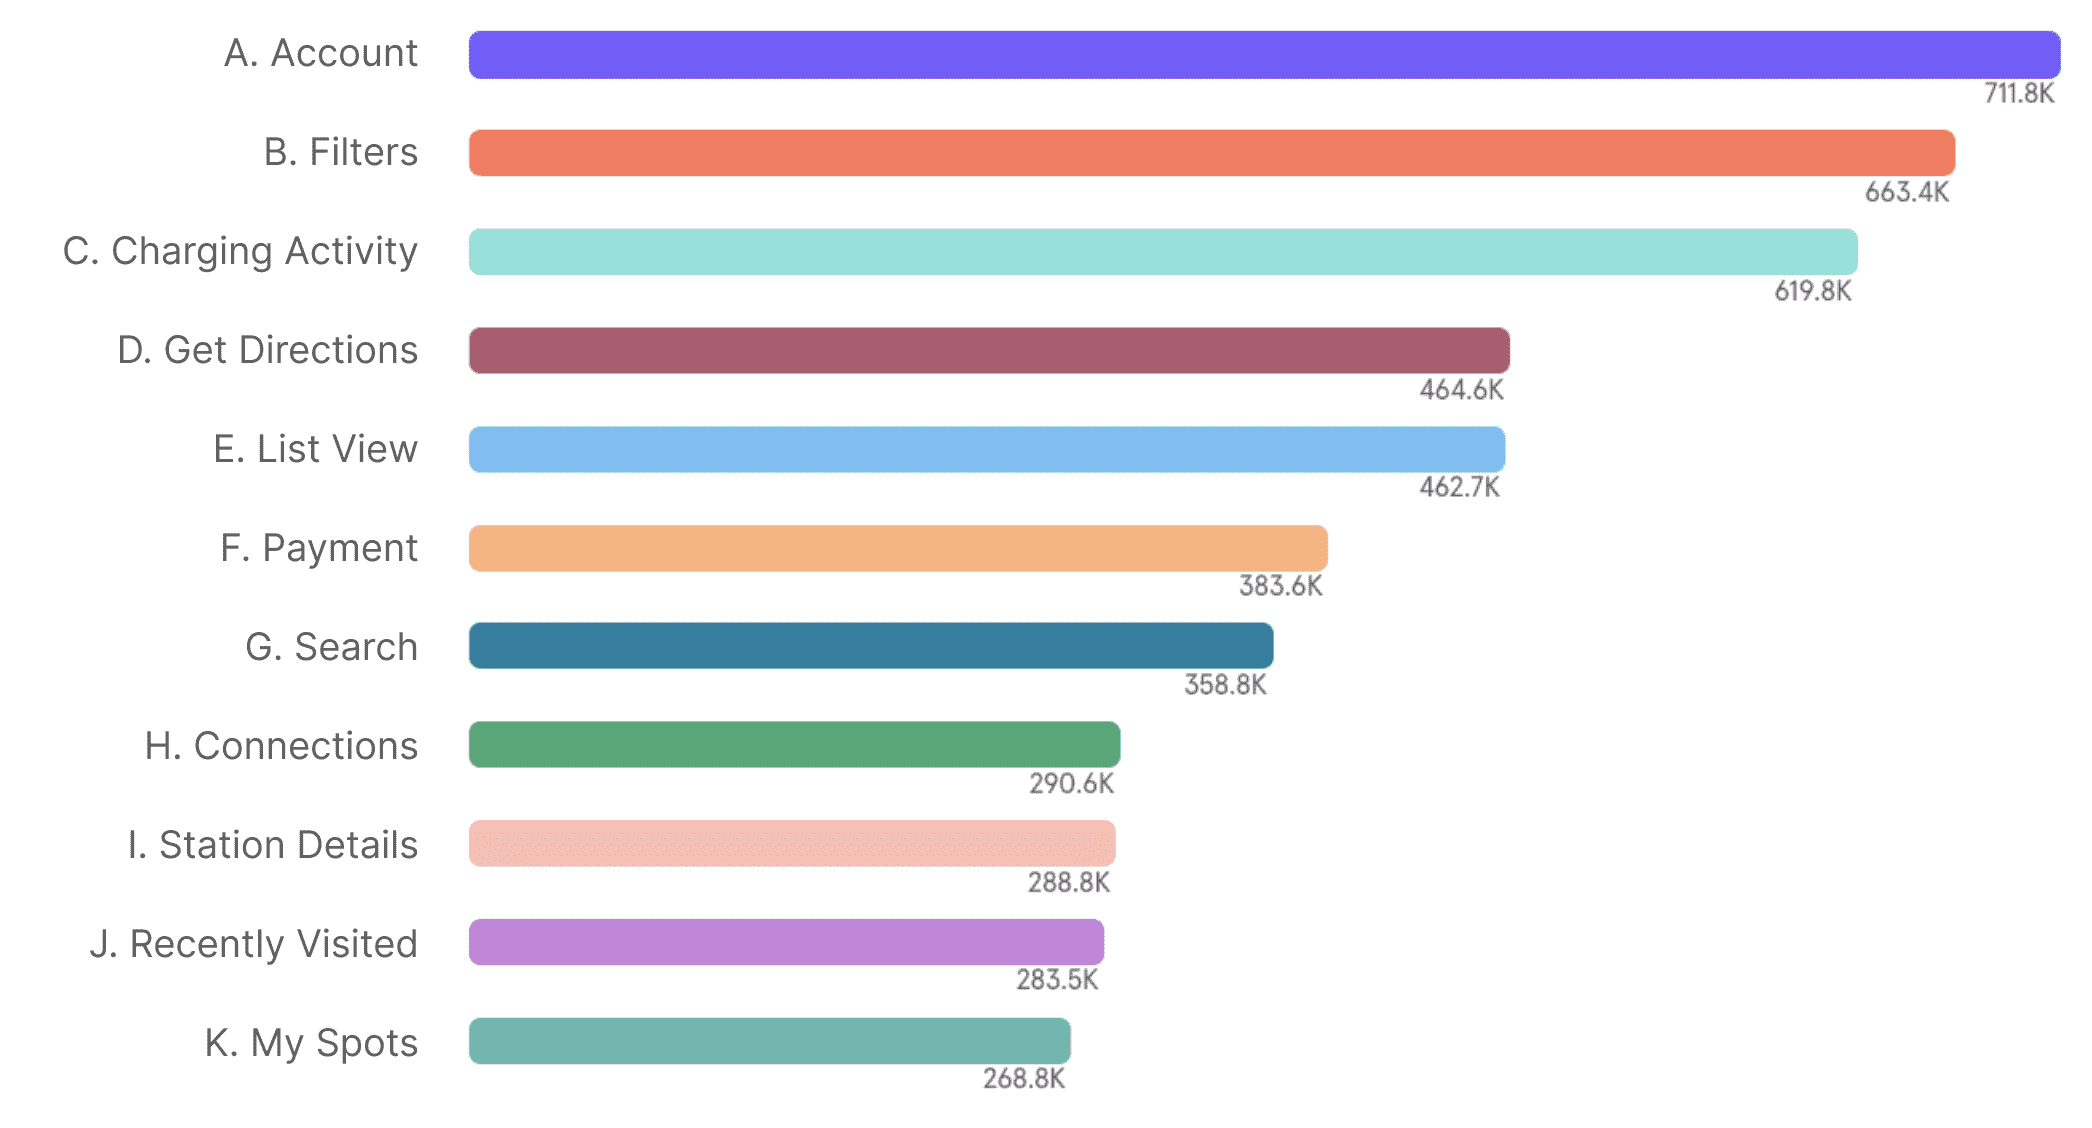 Graph of most clicked on parts of the app